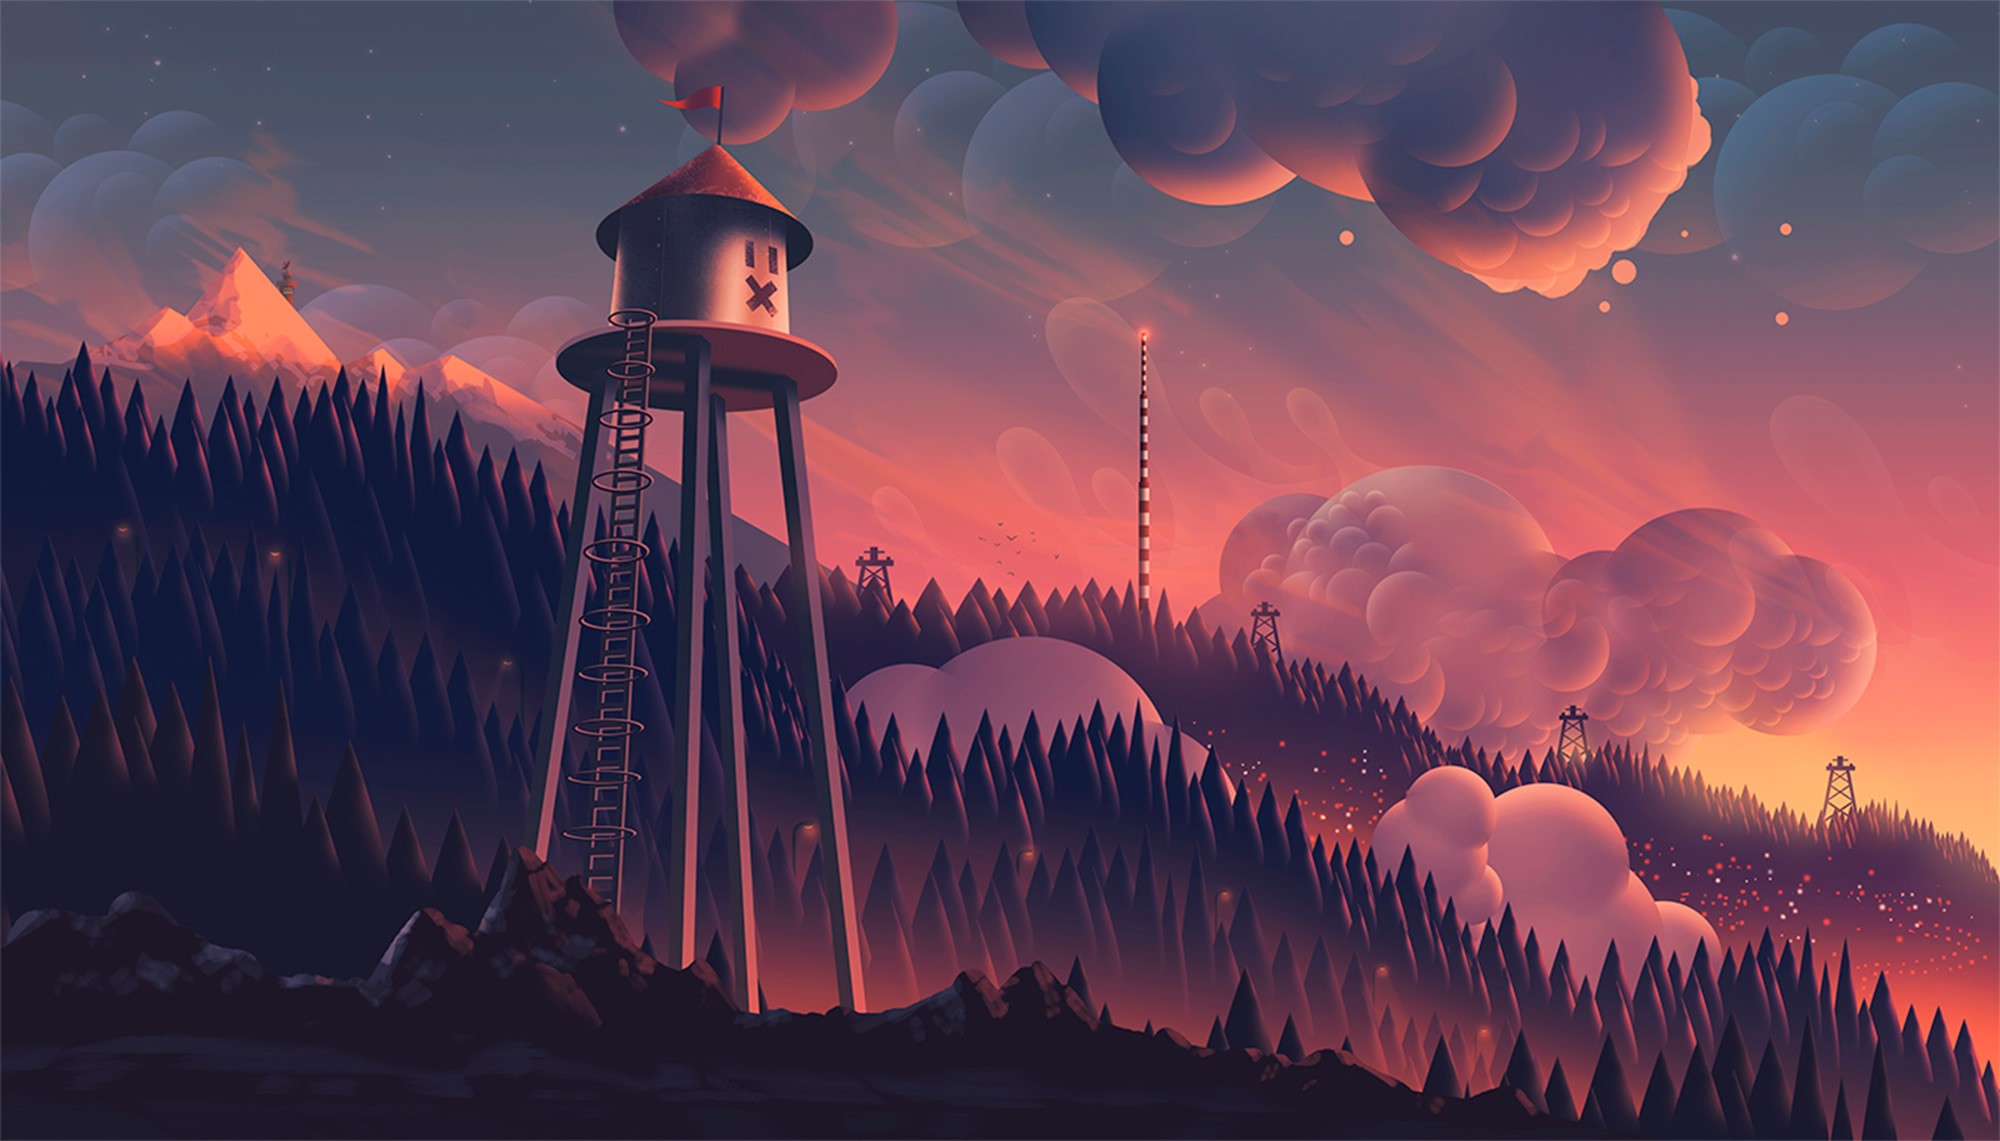 Digital Art Aaron Campbell Trees Clouds Forest Fantasy Art Mountains Sunset 2000x1141